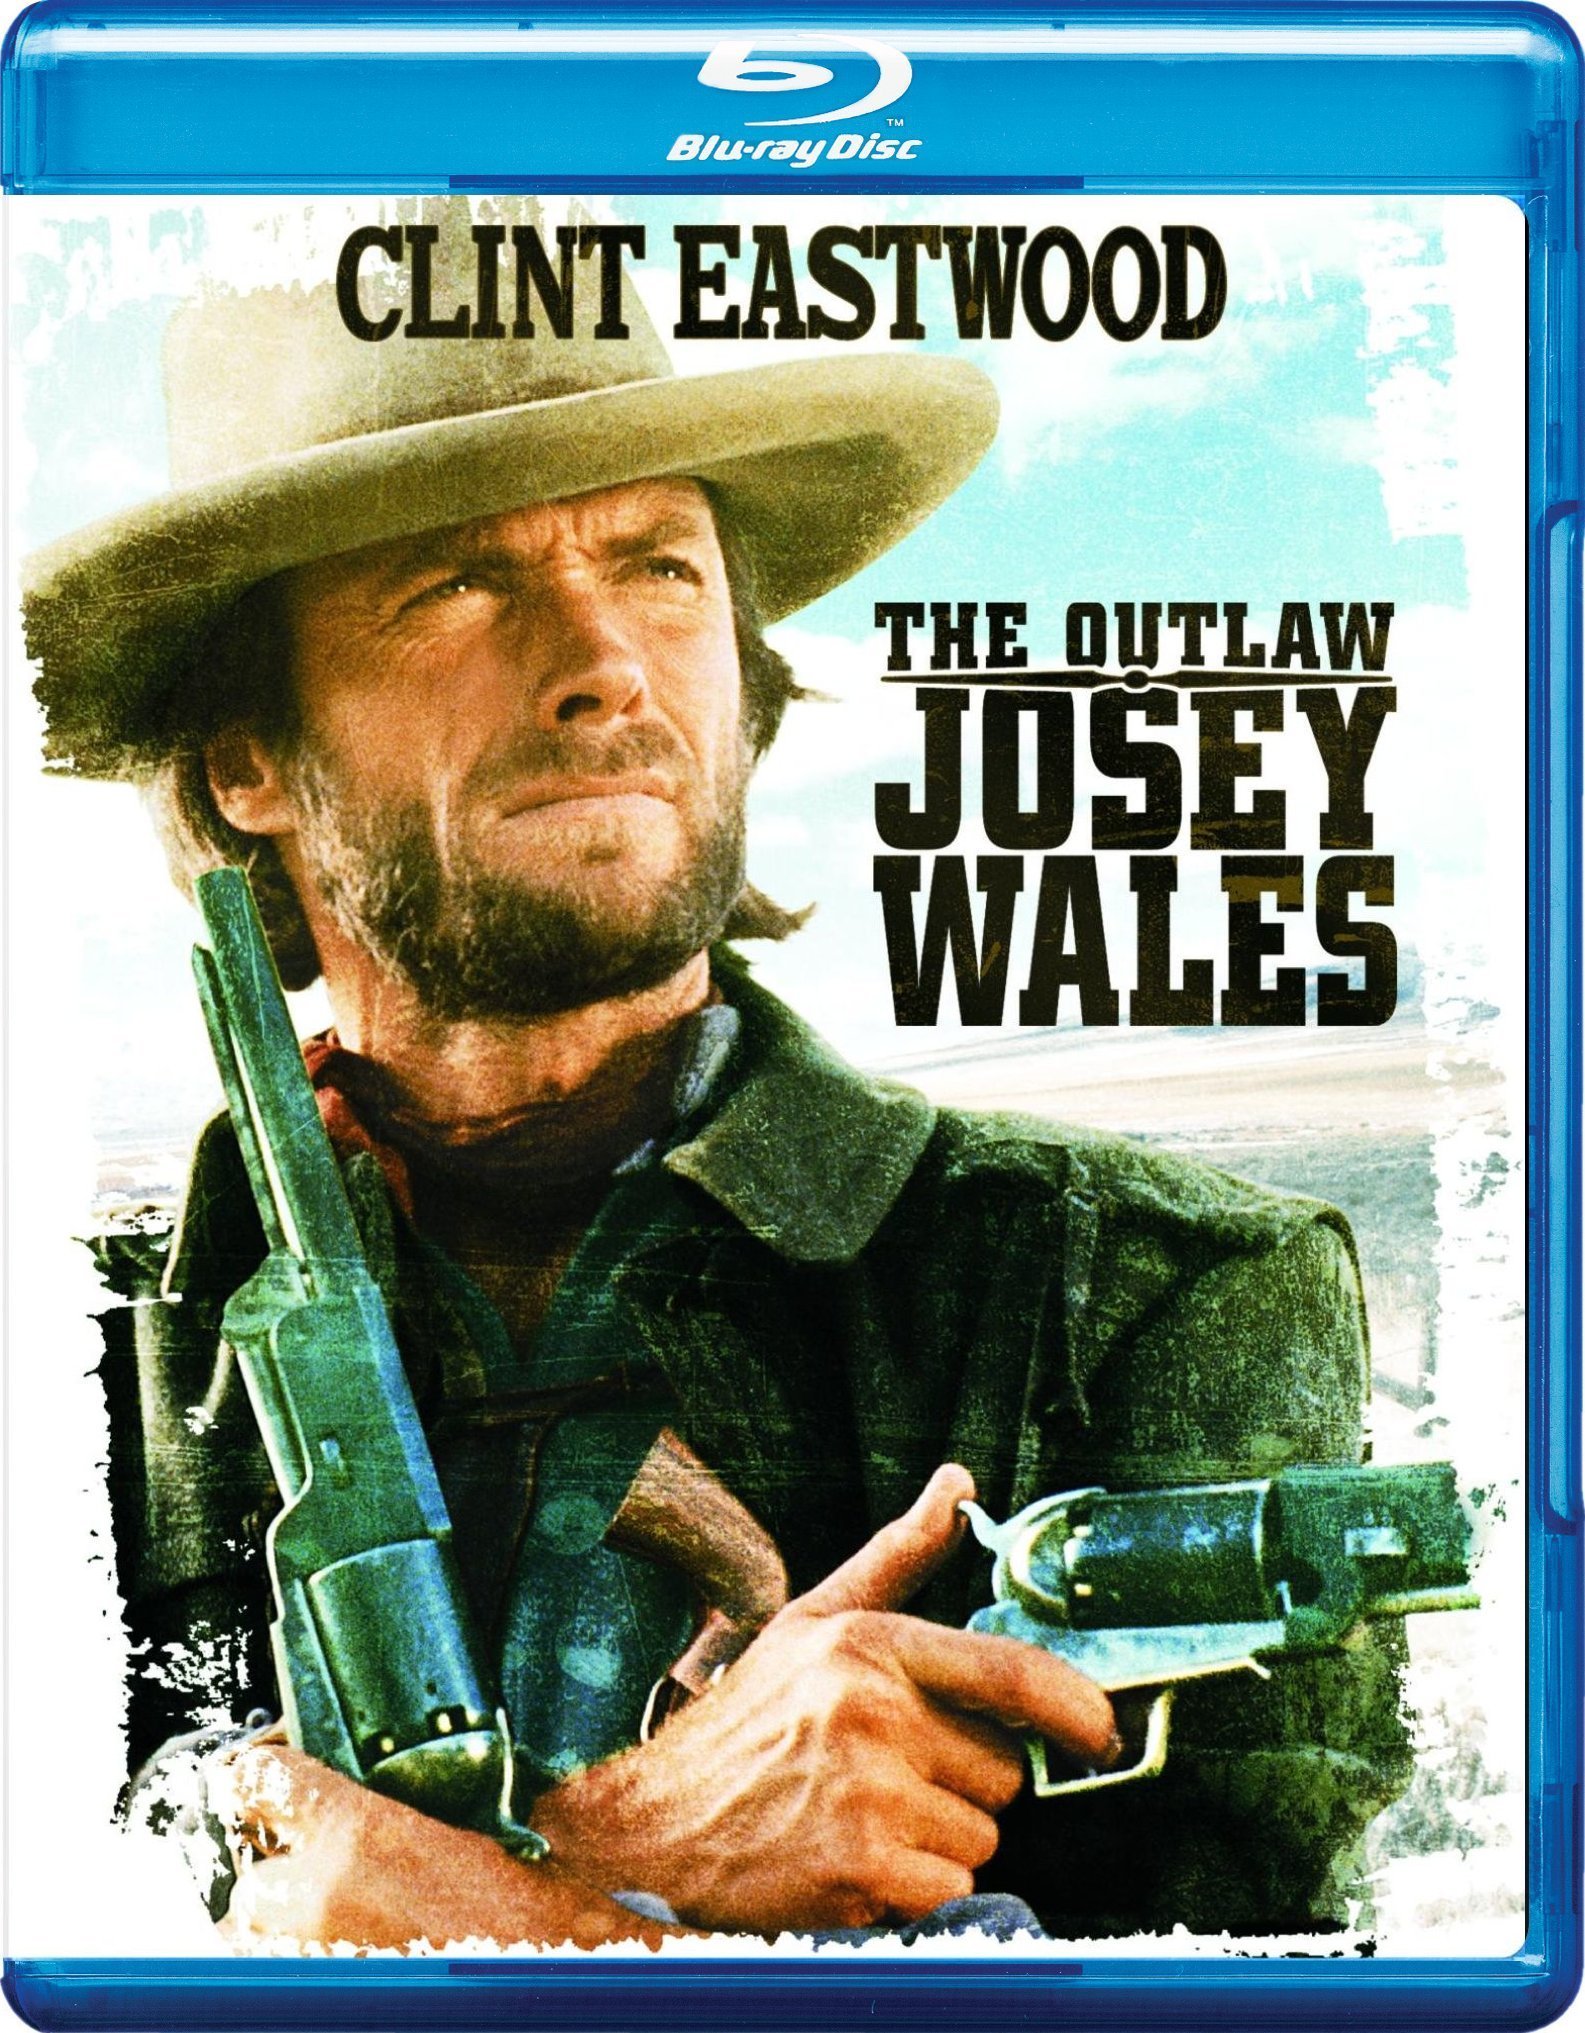 High Resolution Wallpaper | The Outlaw Josey Wales 1585x2033 px